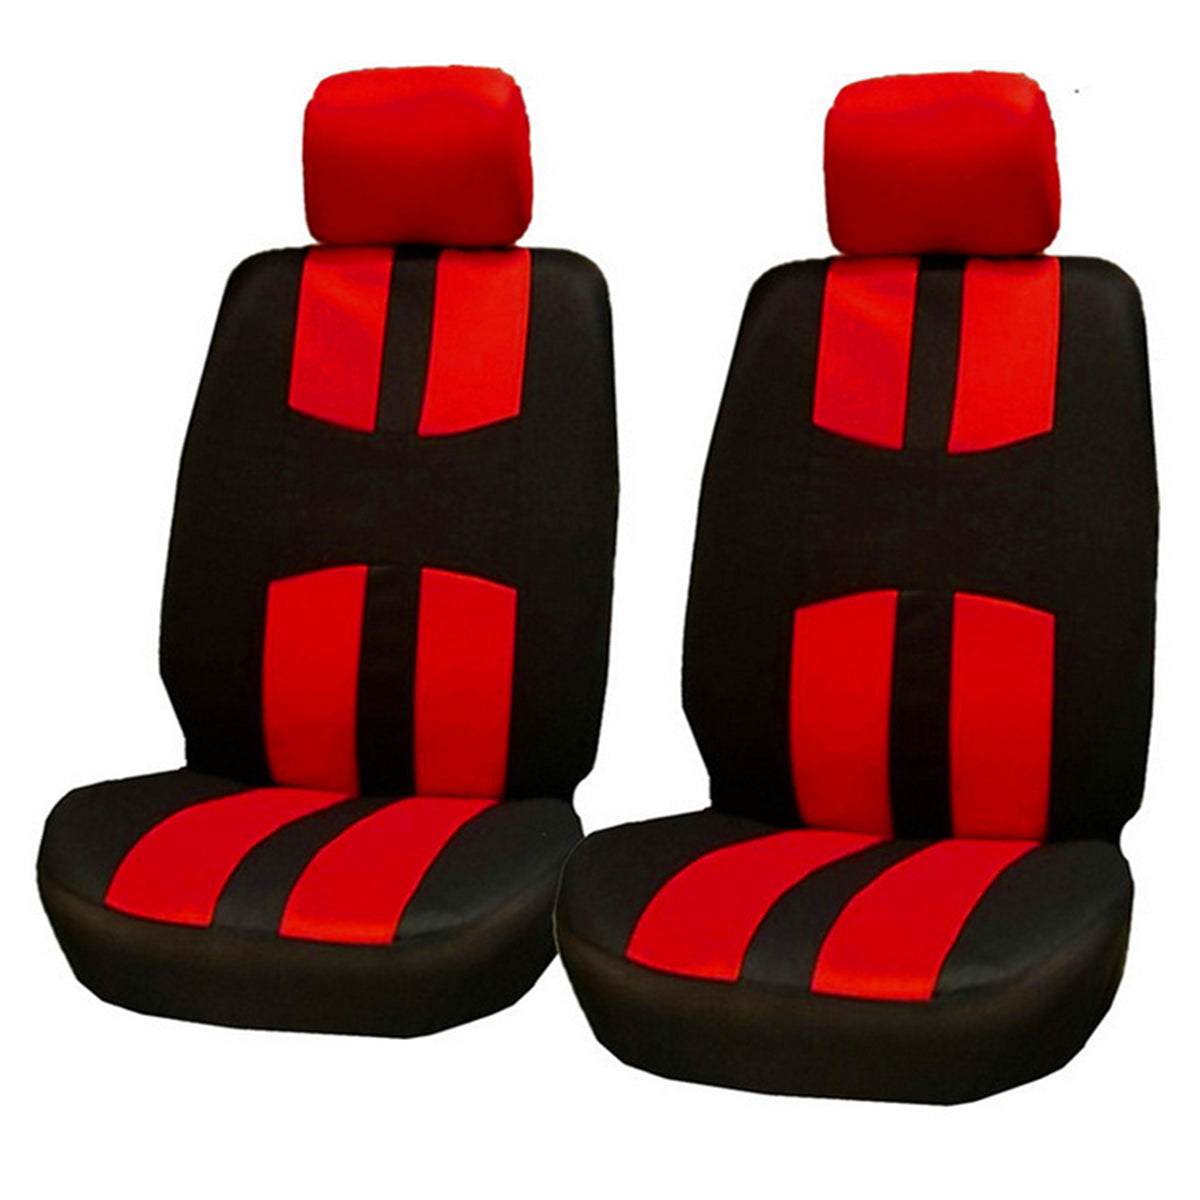 Full Set Car Seat Cover Polyester For Auto Truck SUV 2 Heads Breathable 3D Air Mesh Fabric - Auto GoShop